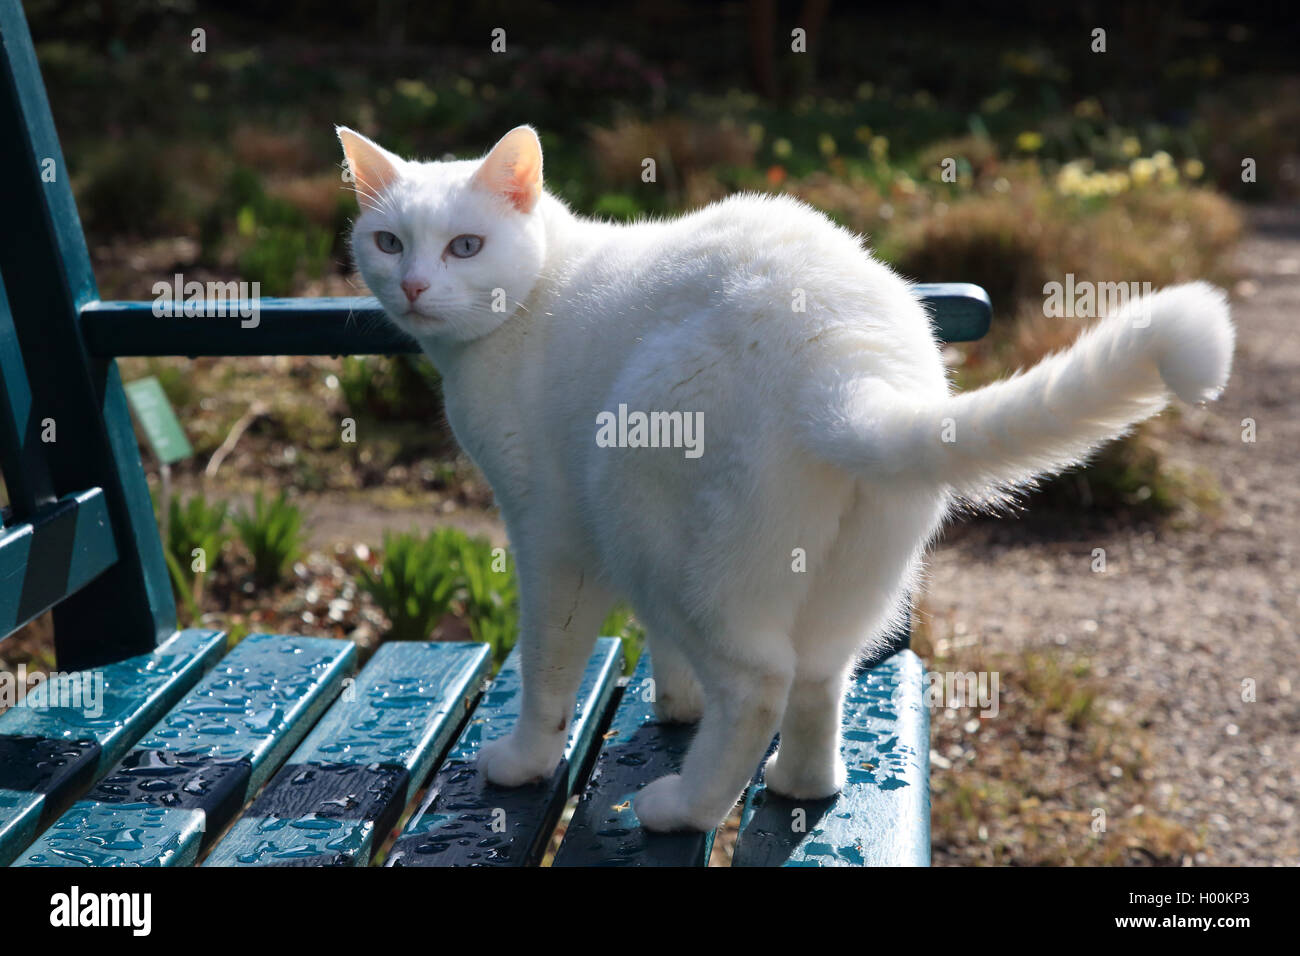 domestic cat, house cat (Felis silvestris f. catus), white cat on a wet garden chair, Germany Stock Photo